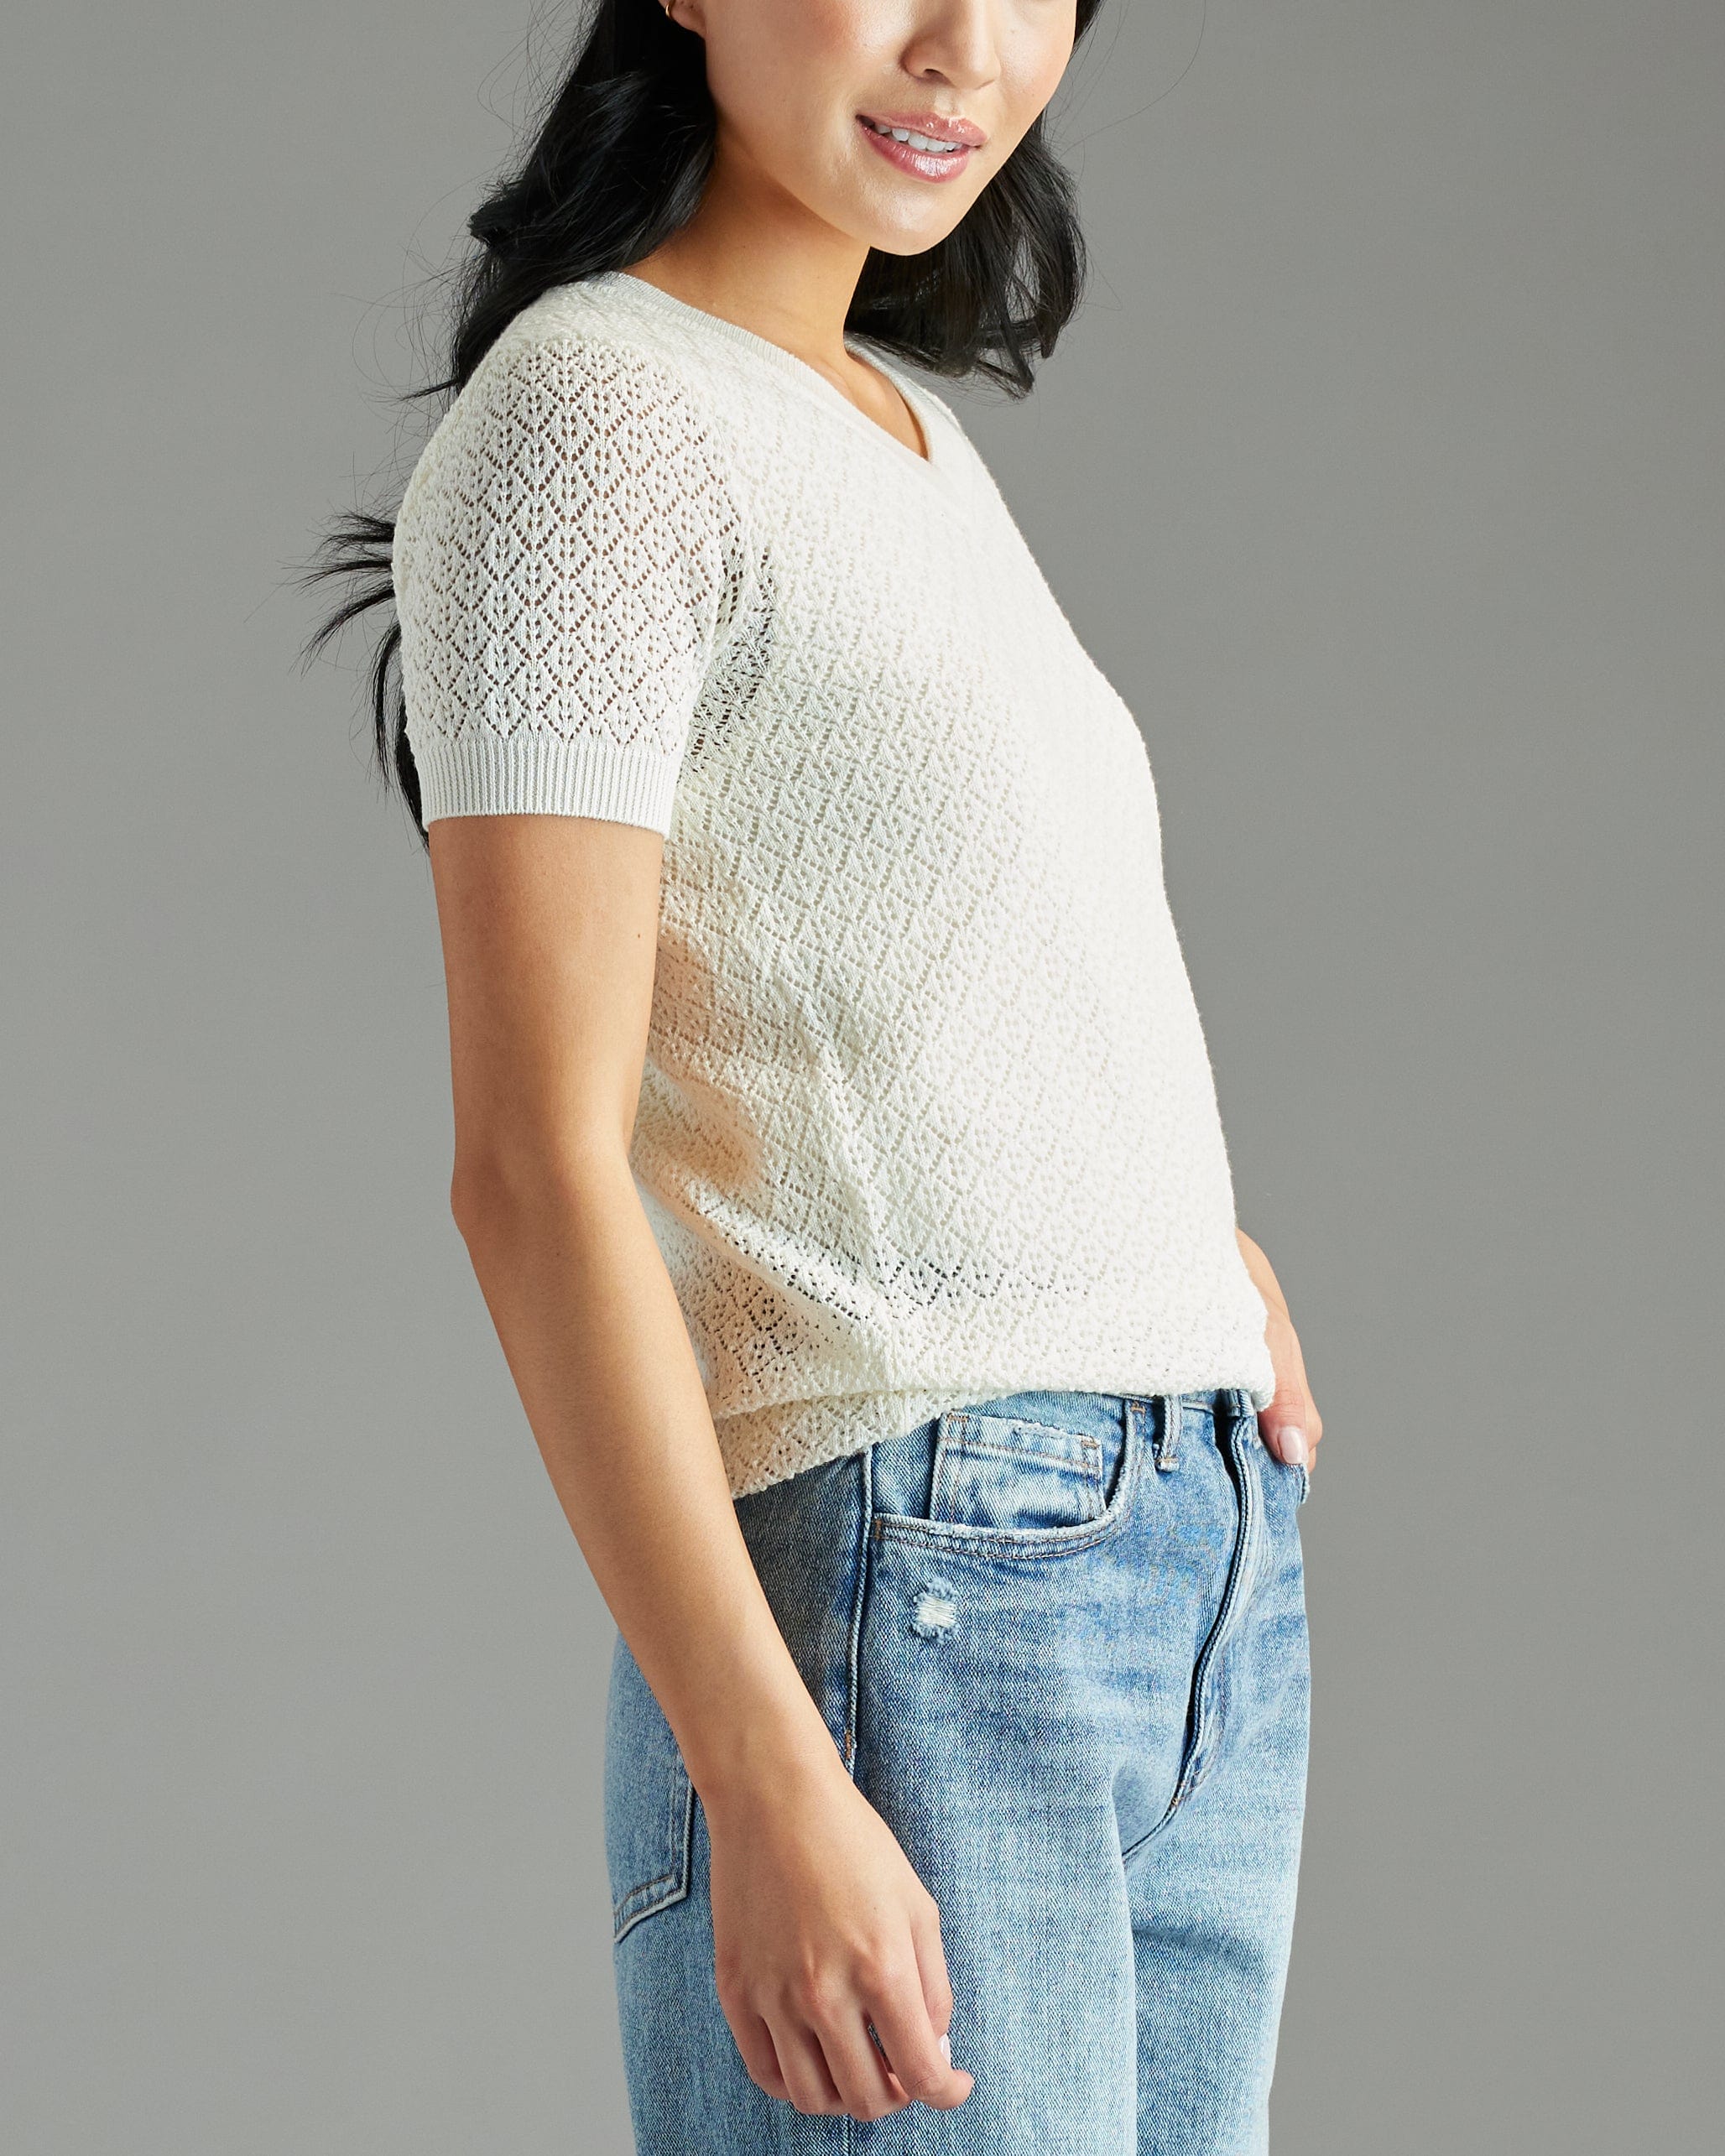 Woman in a white textured short sleeve sweater